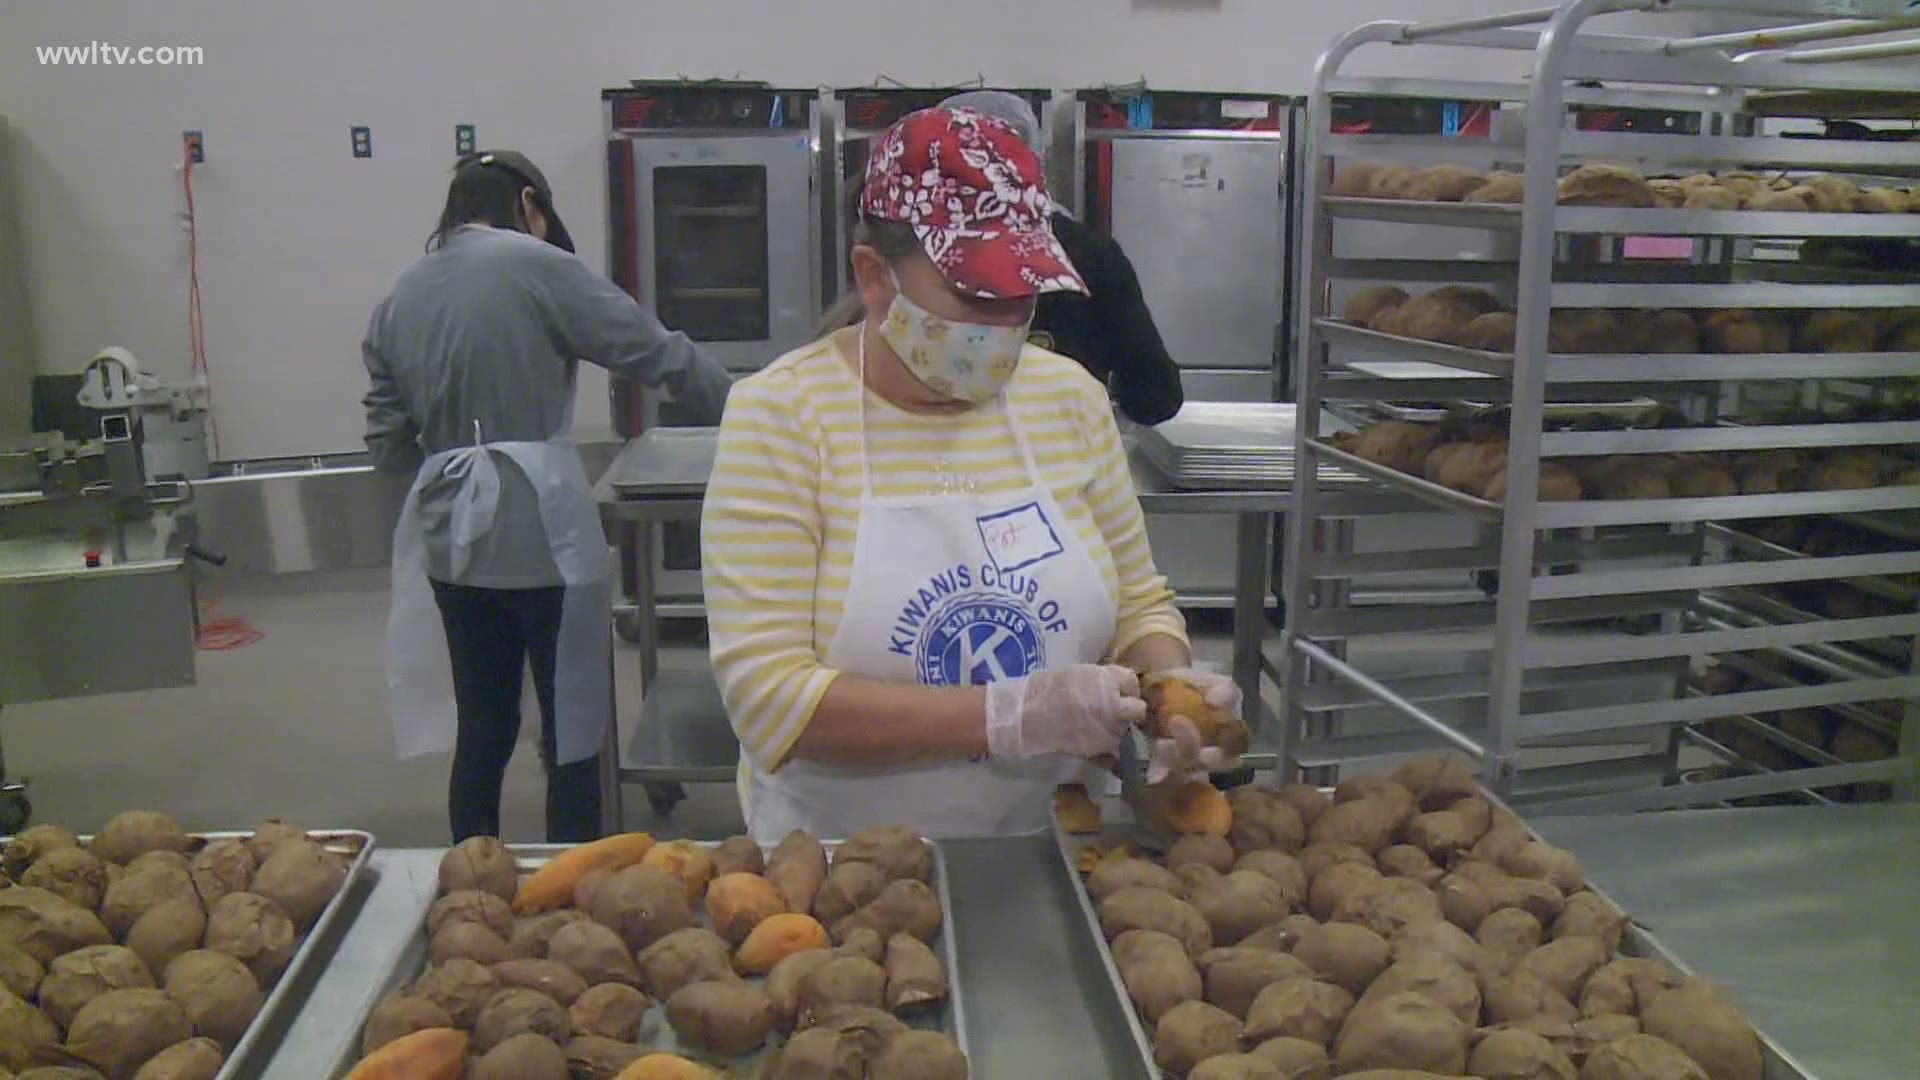 Second Harvest food bank says it is preparing a record number of meals for Thanksgiving meals.